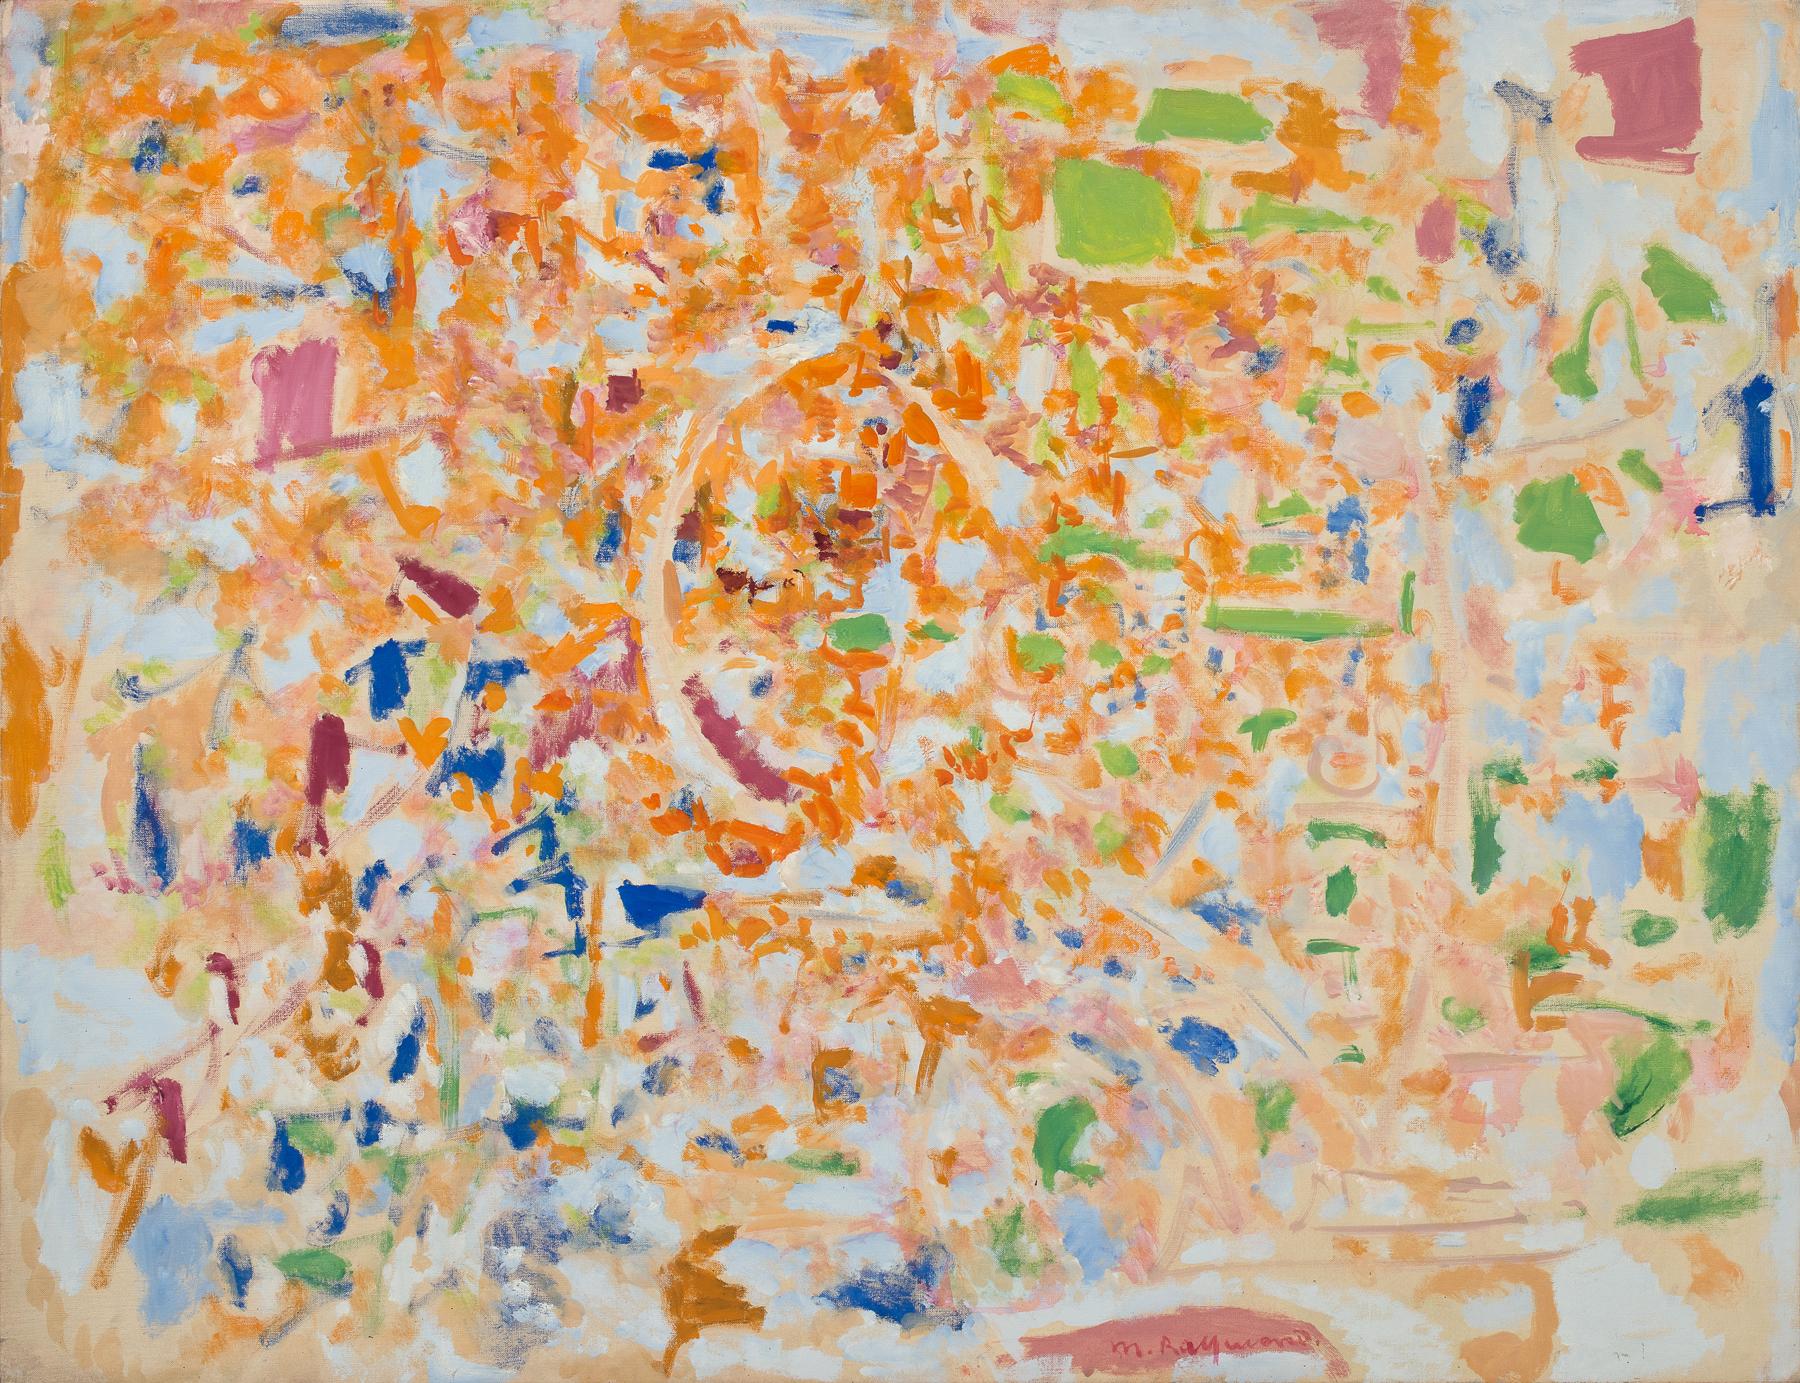 Marie Raymond
Untitled – c. 1963
Oil on canvas
96 x 130 cm / 37.7 x 51.1 in.
Signed lower right